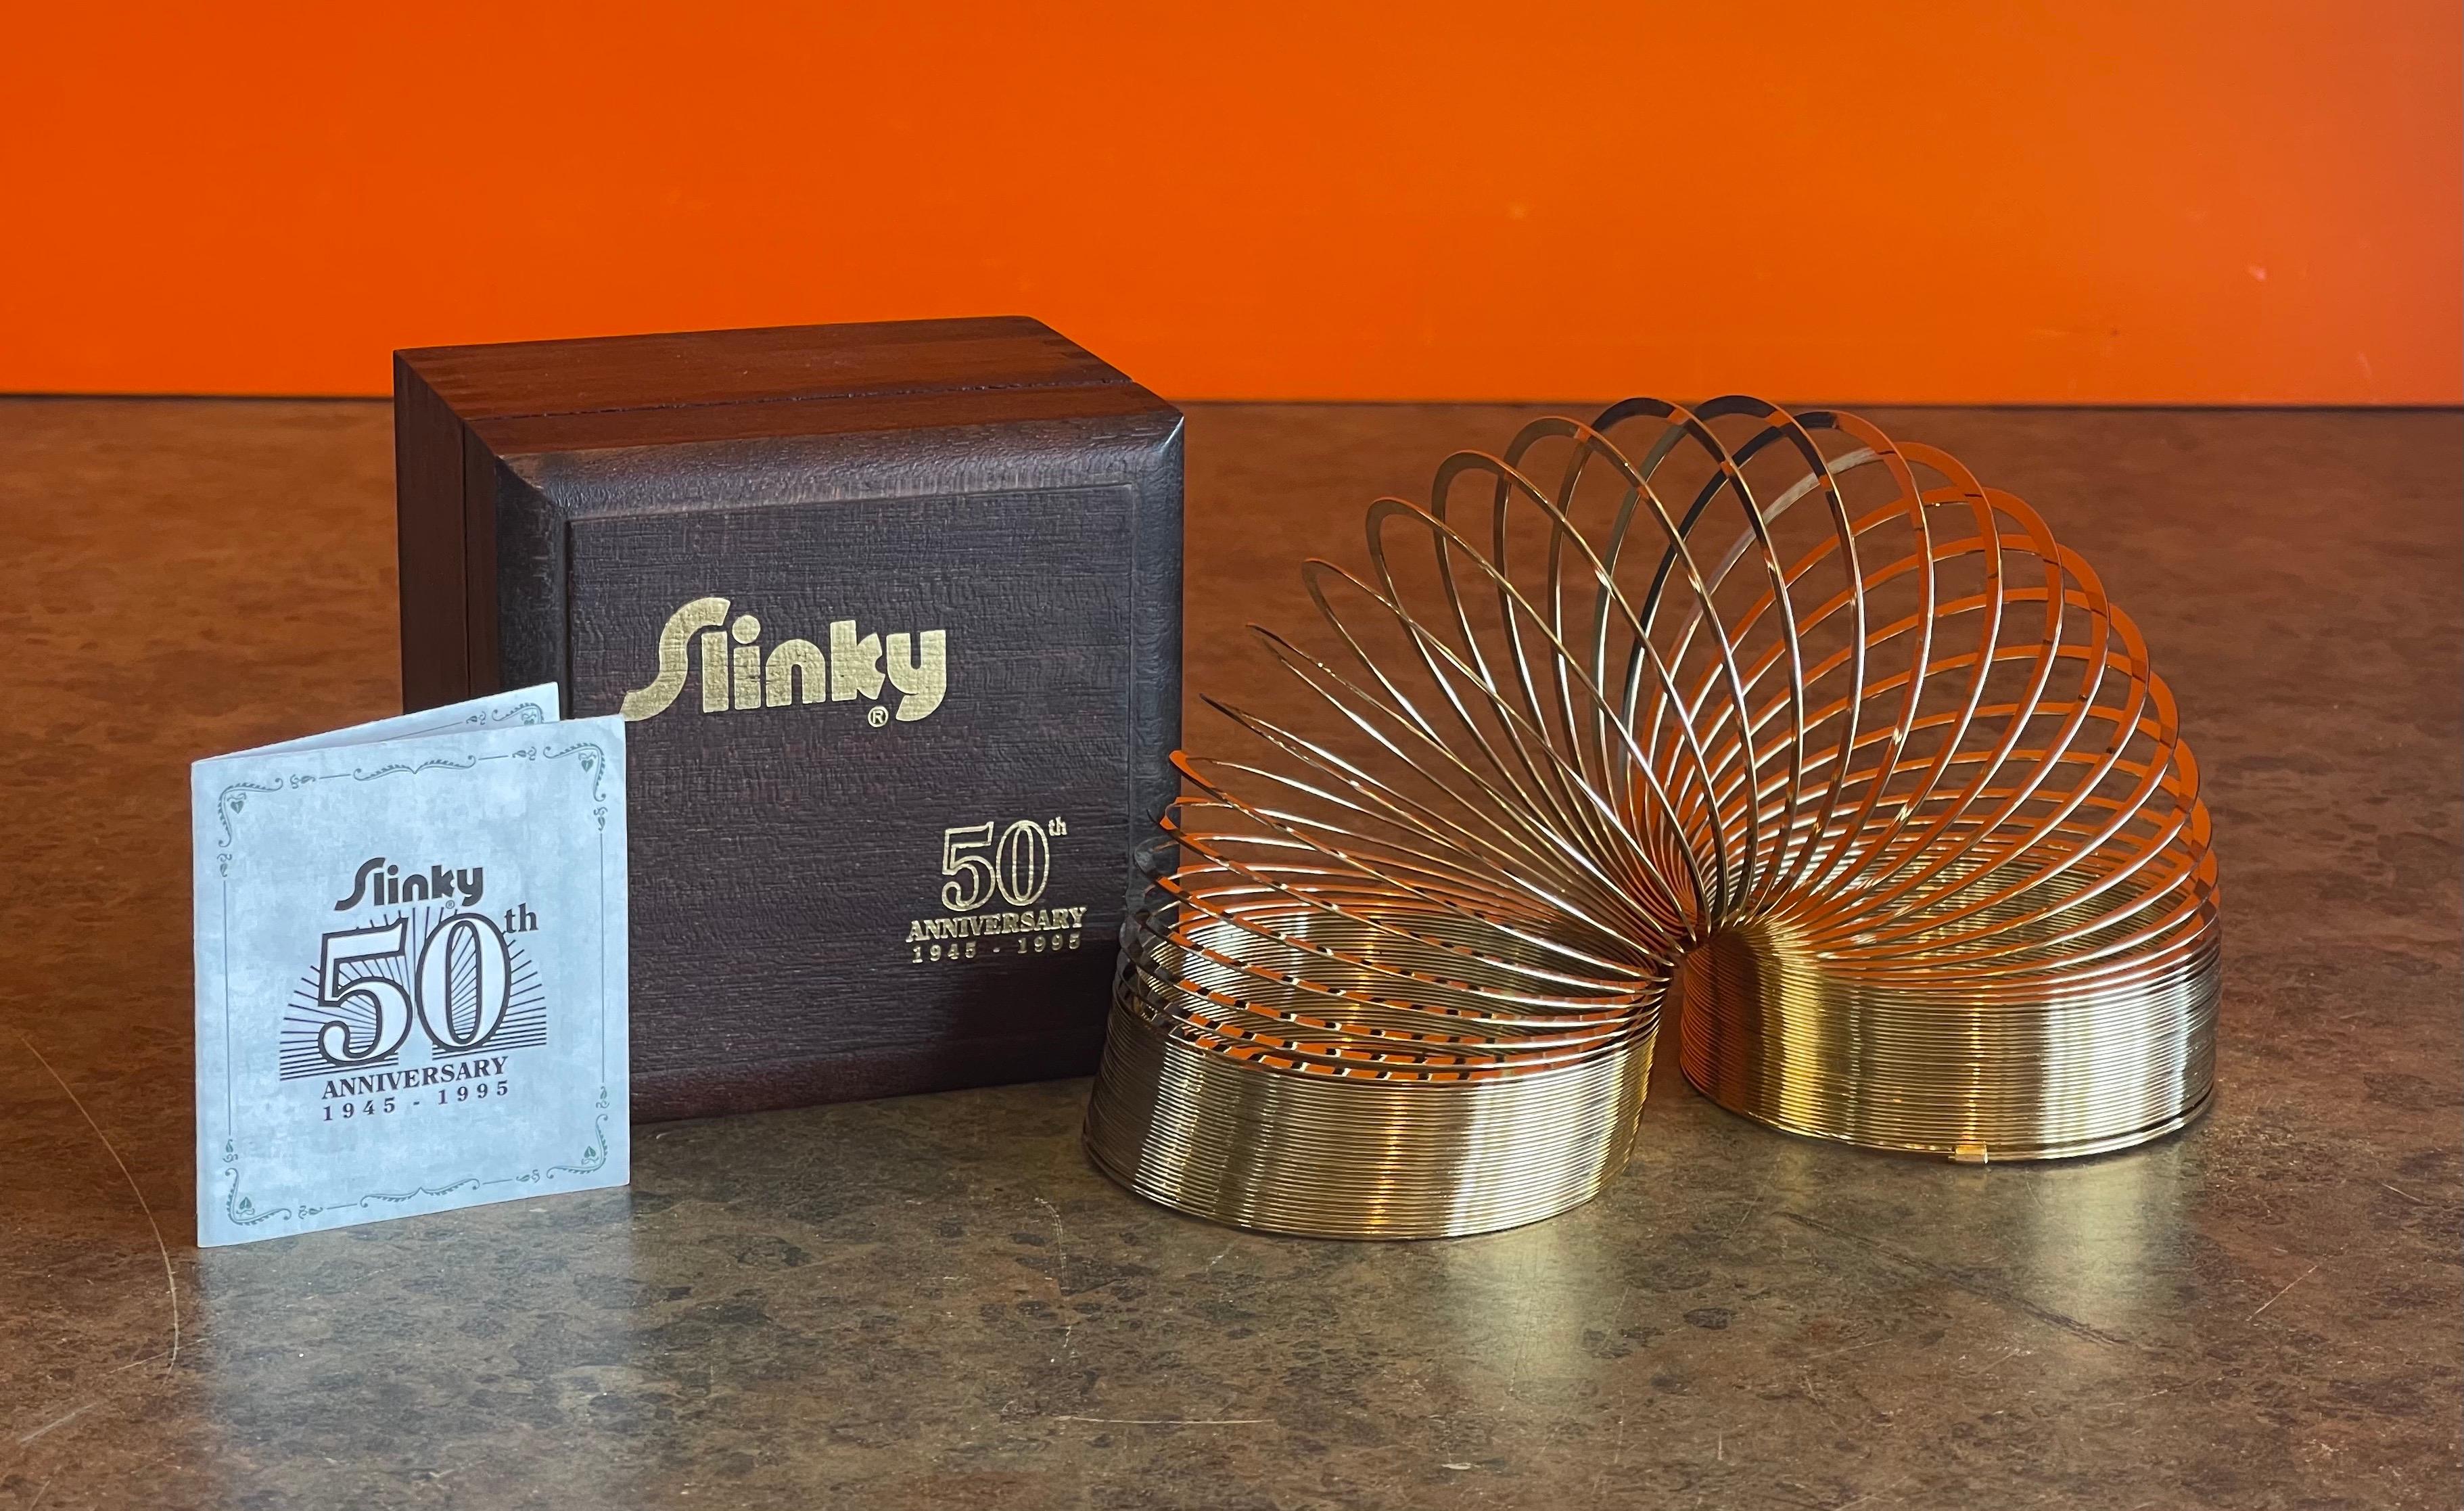 Like new 50th Anniversary gold-plated brass Slinky toy in wood box, circa 1995. This item is in original plastic packaging an has never been played with; the piece comes with the original brochure / song sheet. The Slinky was released in 1995 to